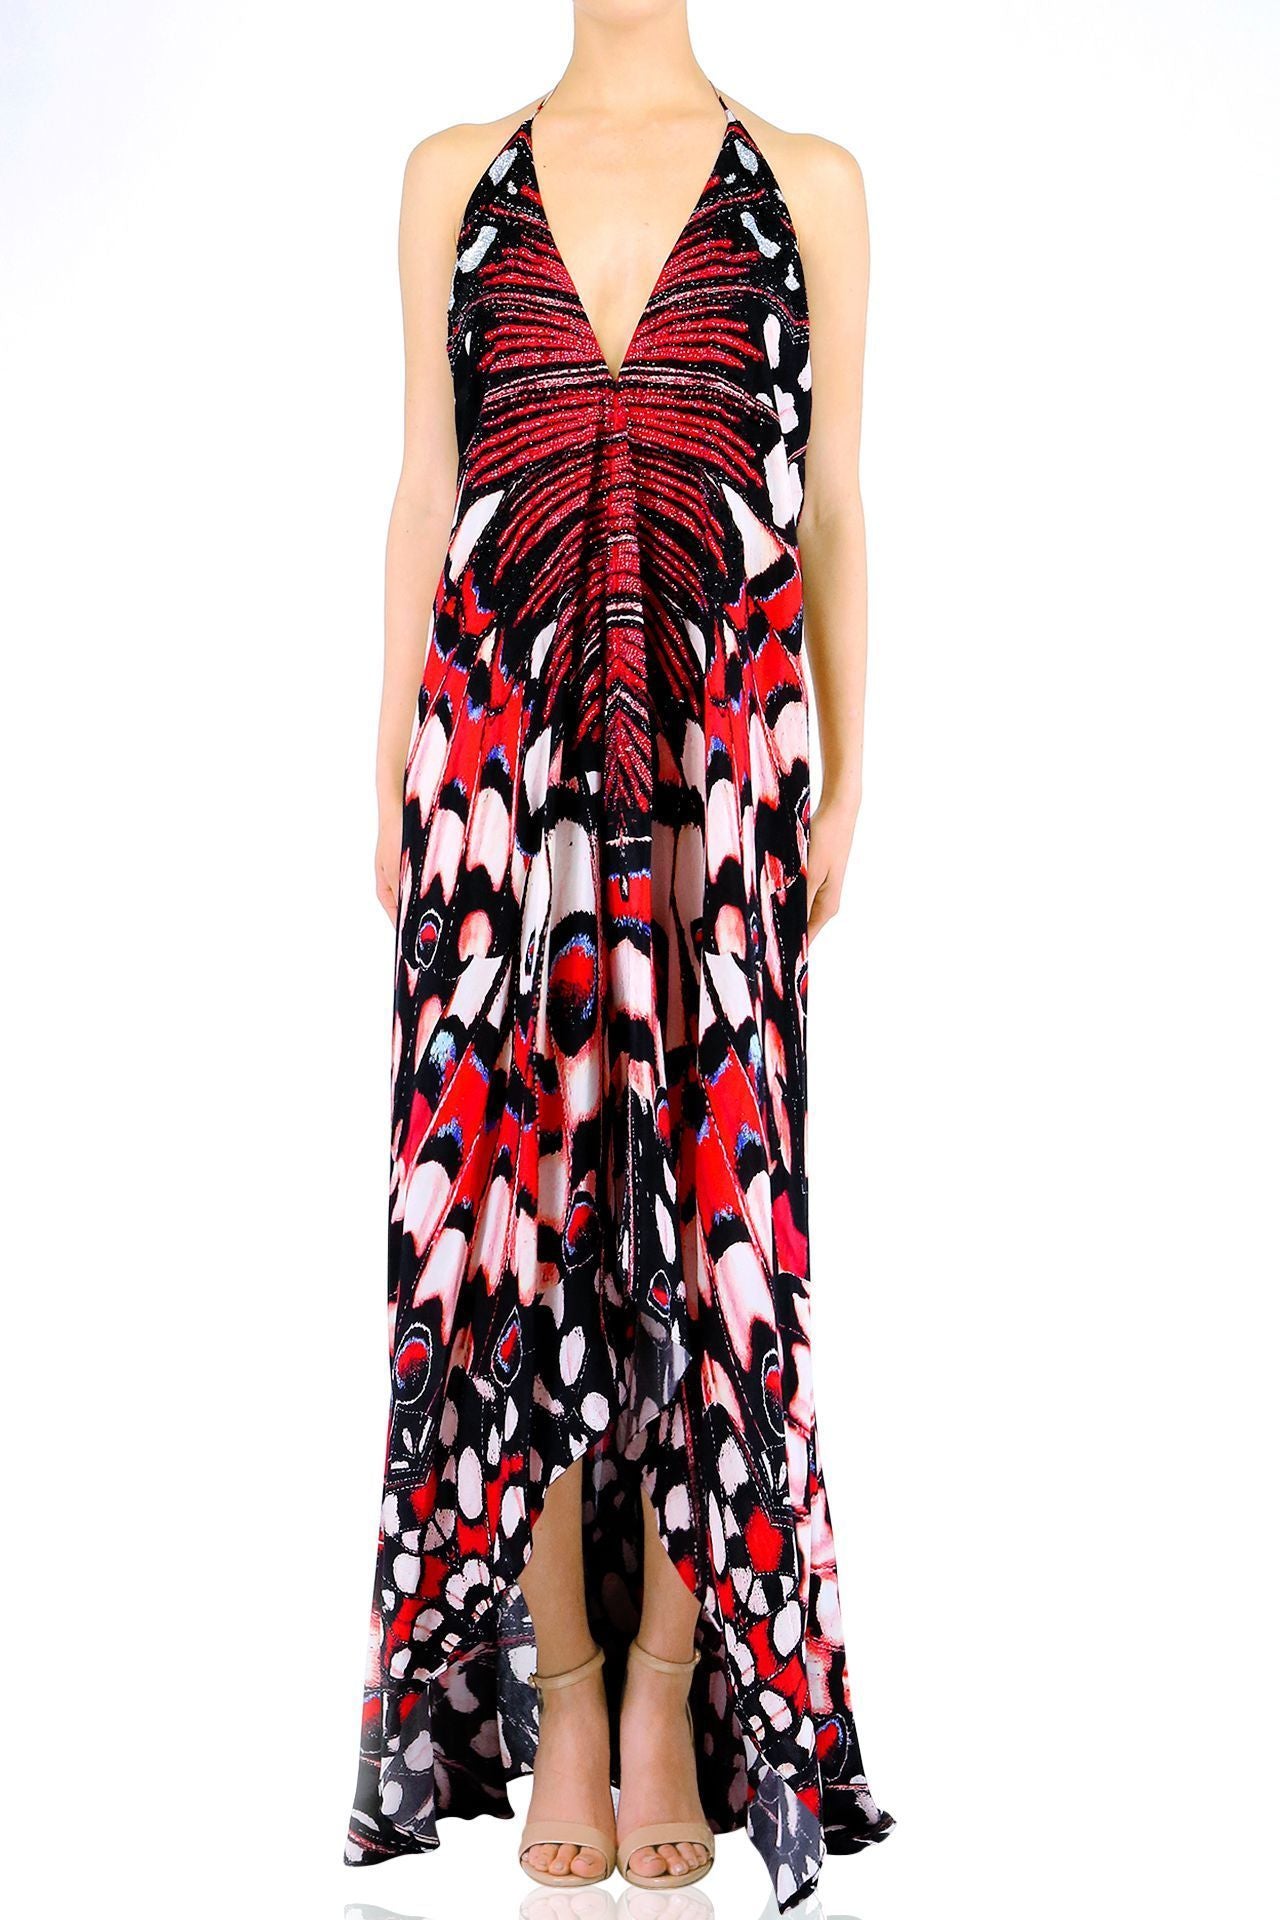 Butterfly Print Multiway Red Dress